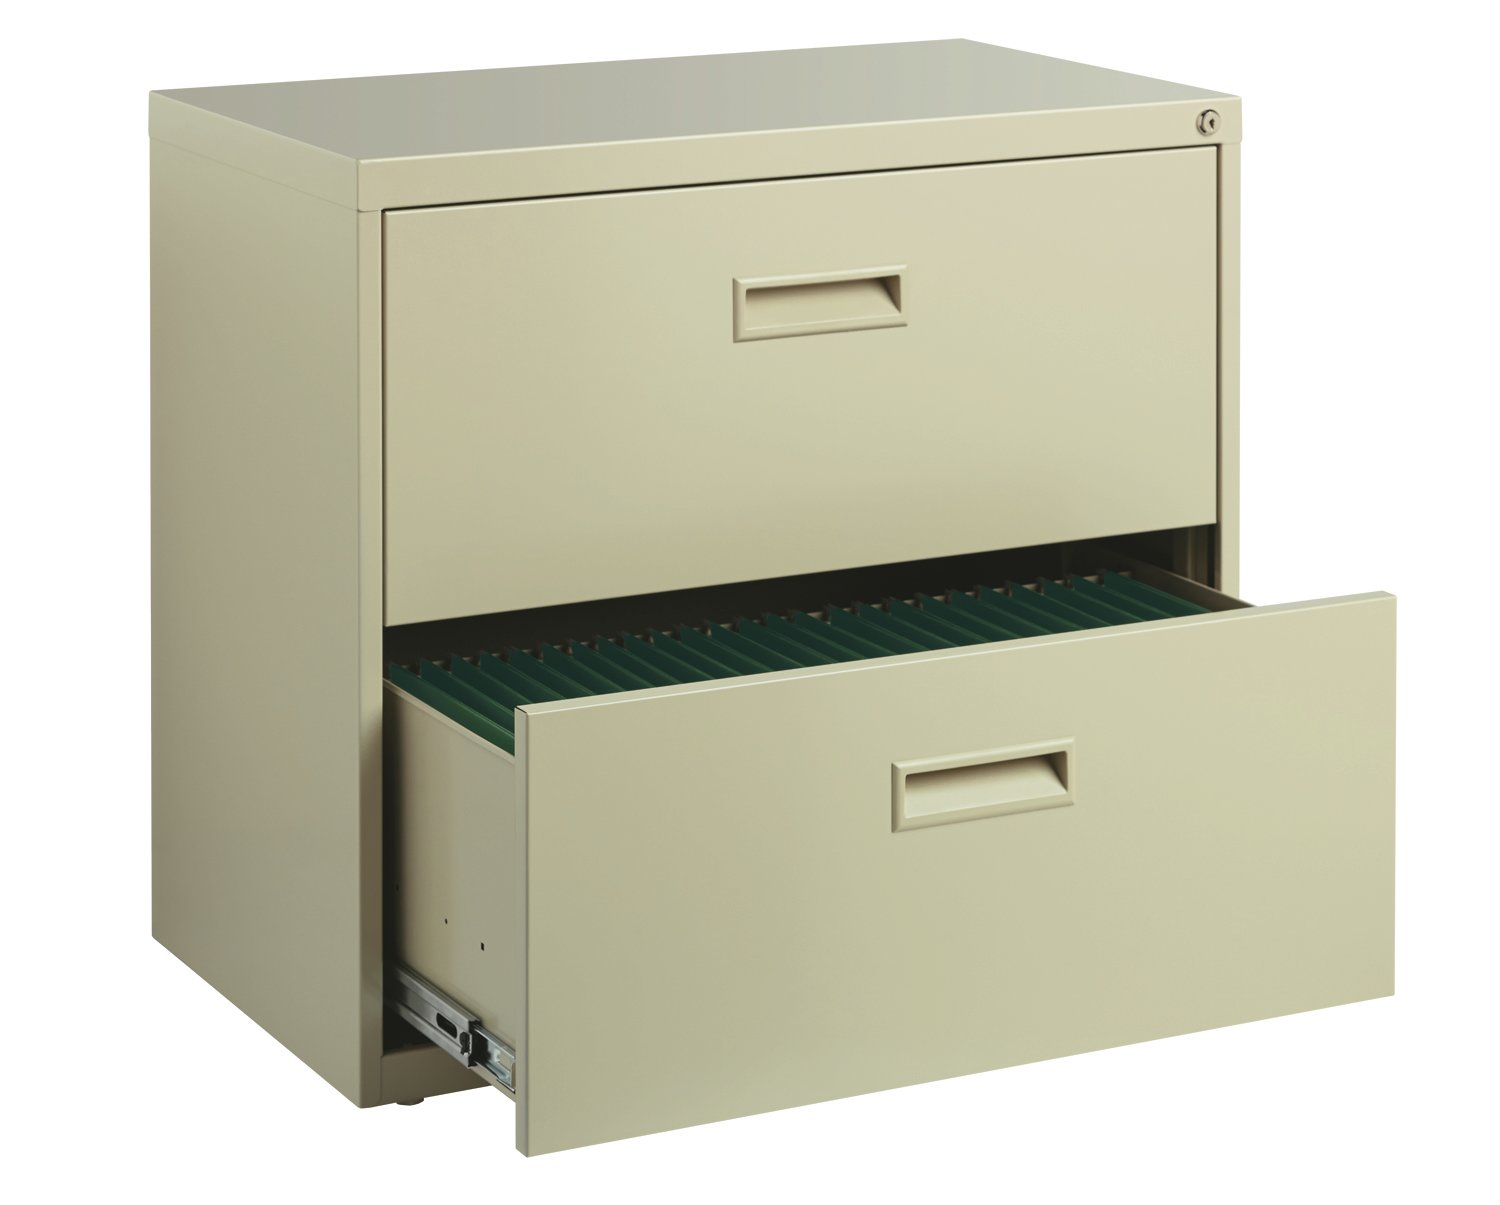 Walt 2 Drawer Lateral Filing Cabinet Reviews Allmodern intended for sizing 1500 X 1205